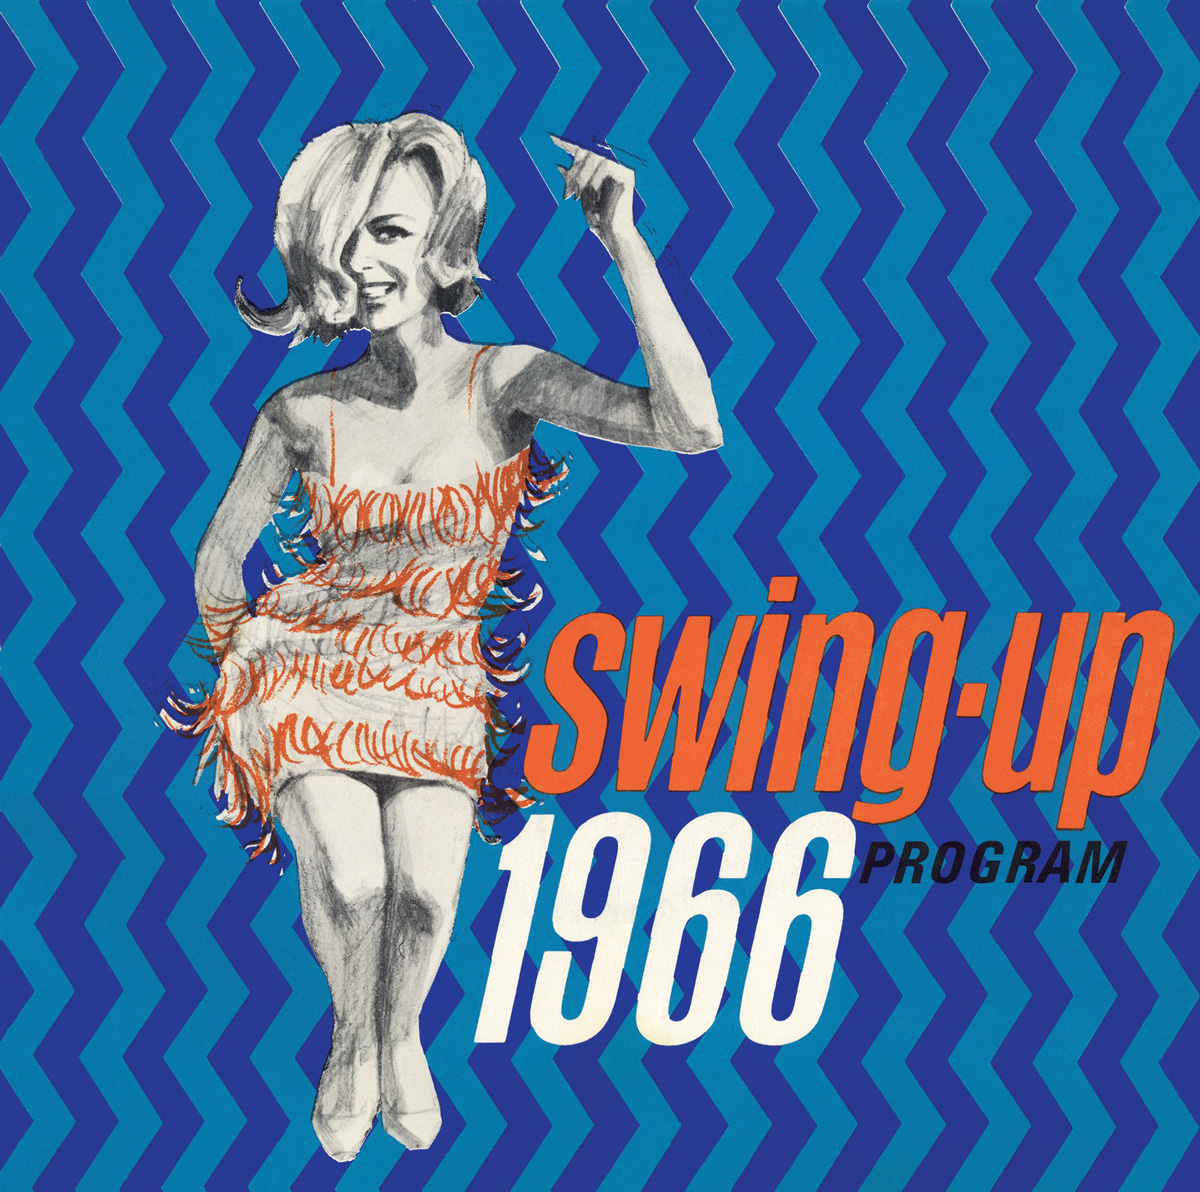 An album cover from 1966 for a Chrysler-Plymouth announcement show, titled “Swing Up ’66.”